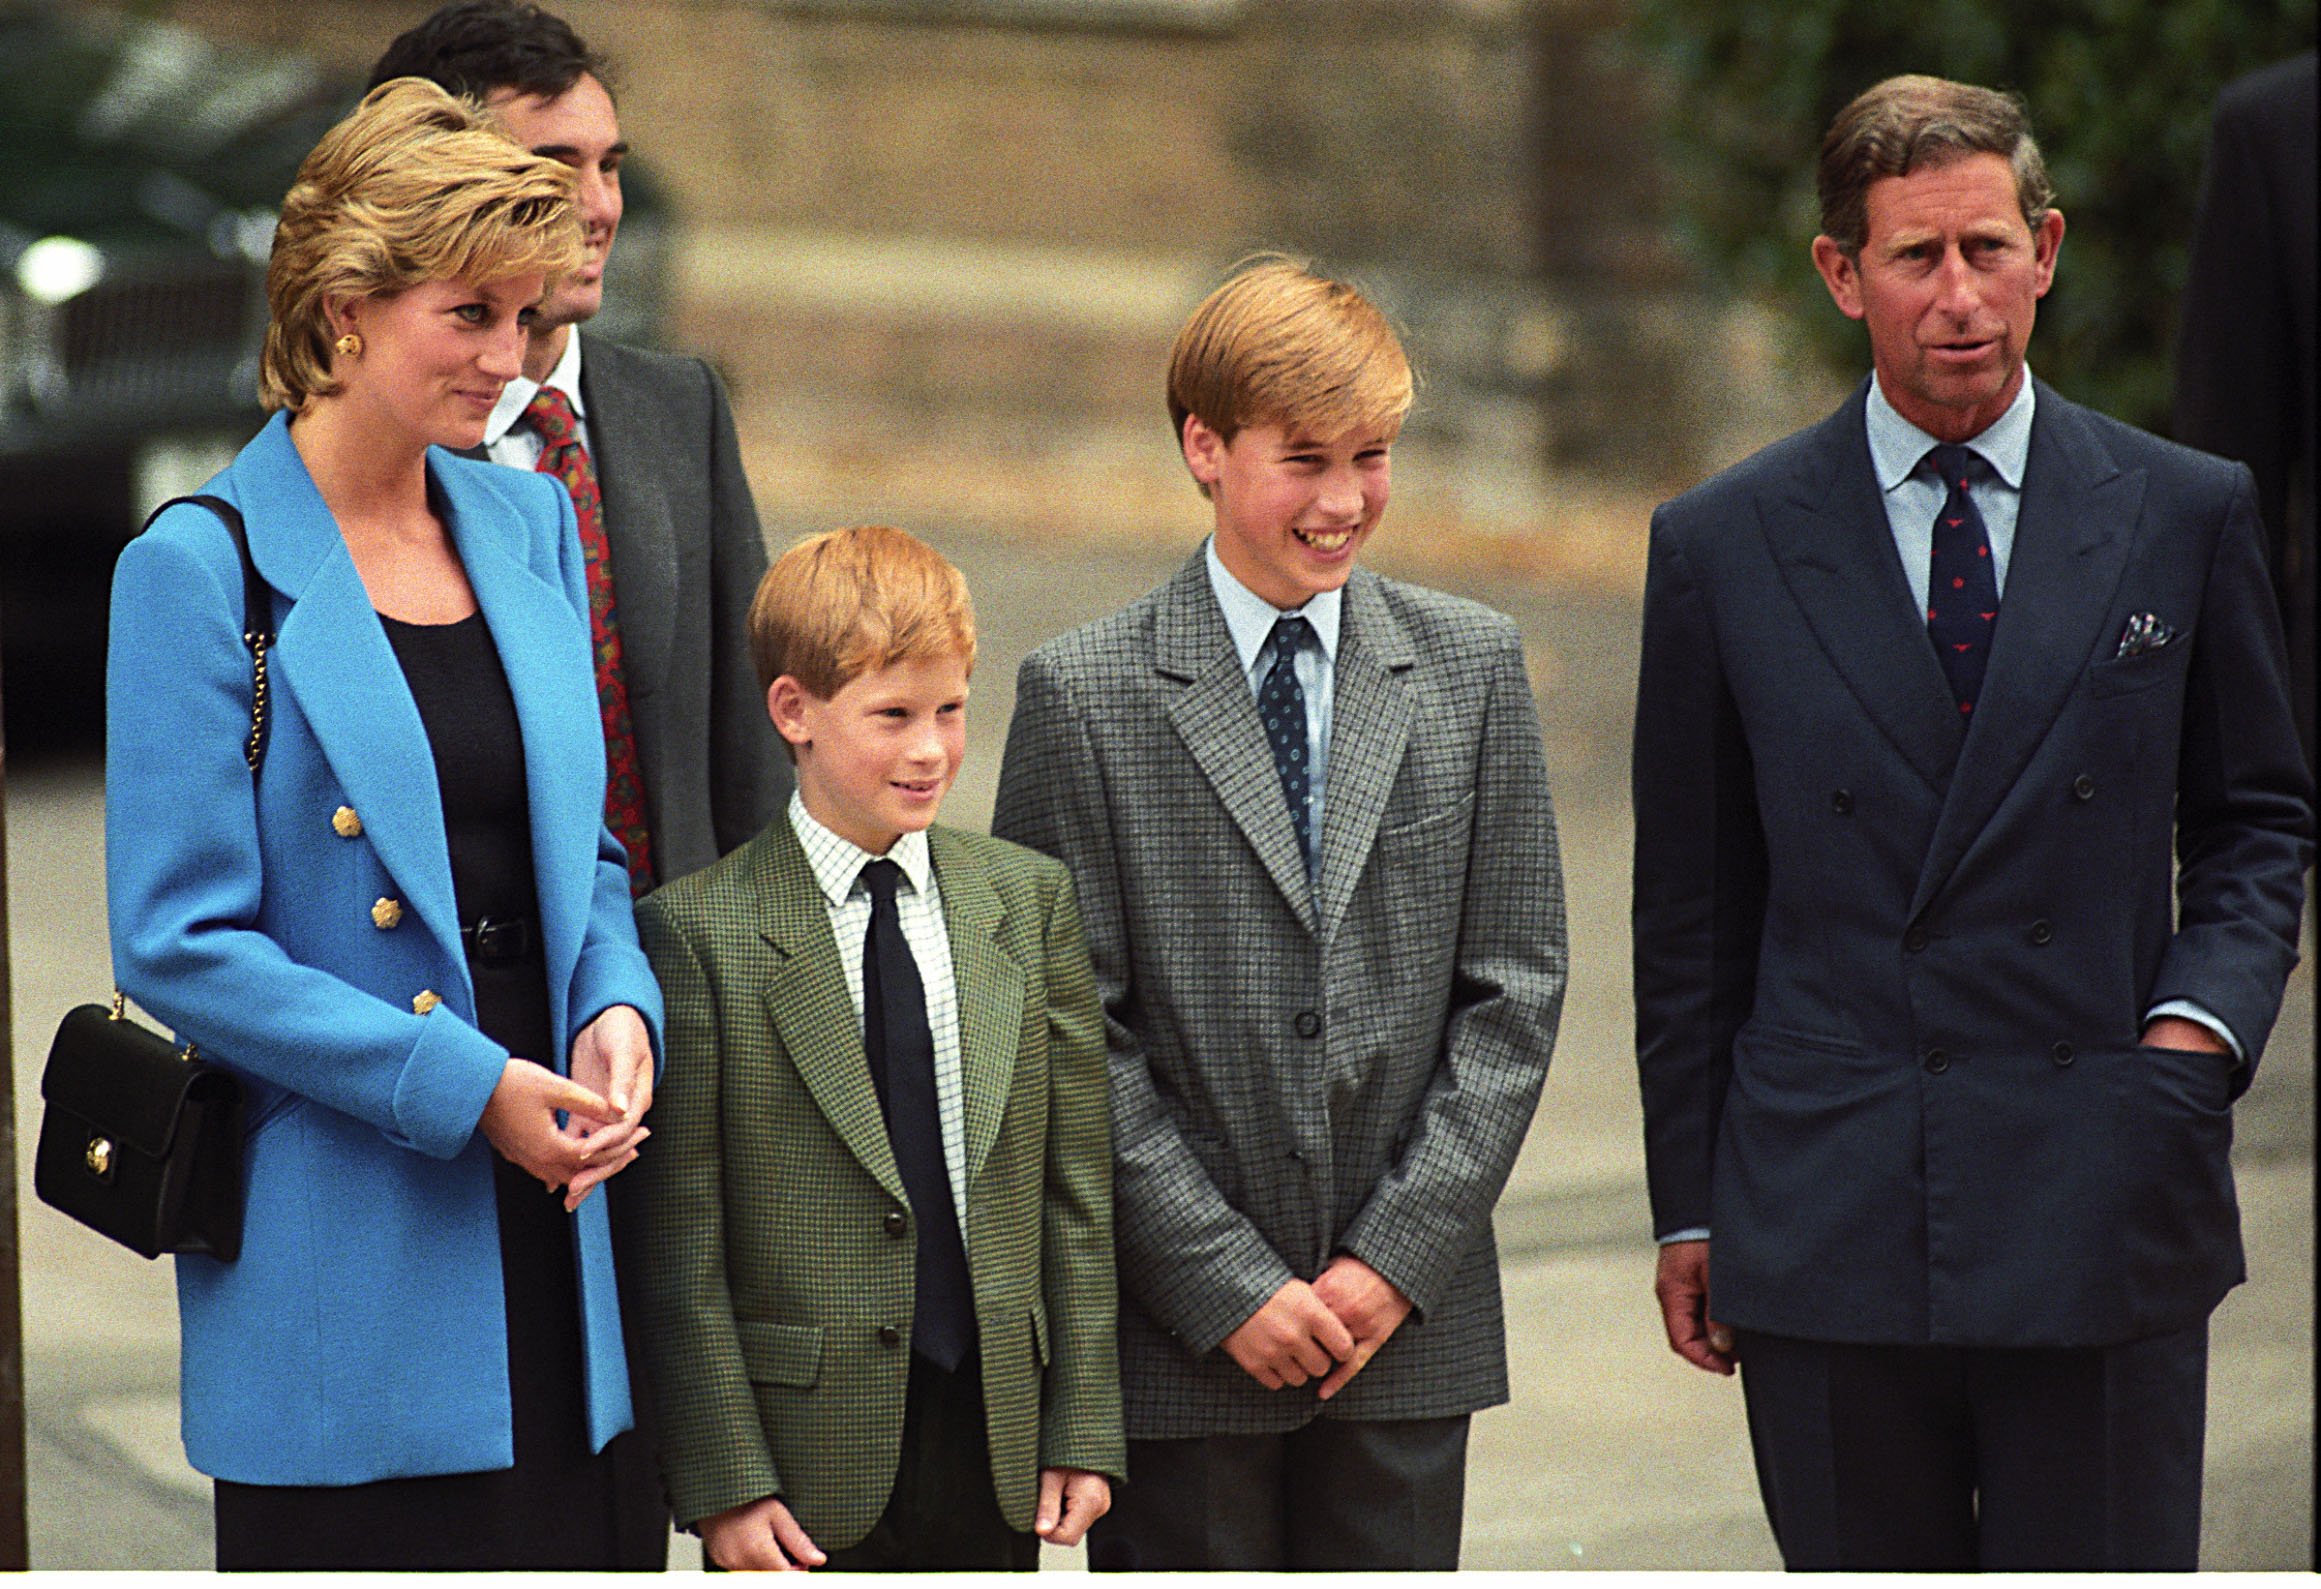 Princess Diana, Prince Harry, Prince William, Prince Charles at Prince William's first day at Eton on September 6, 1995 in England. / Source: Getty Images